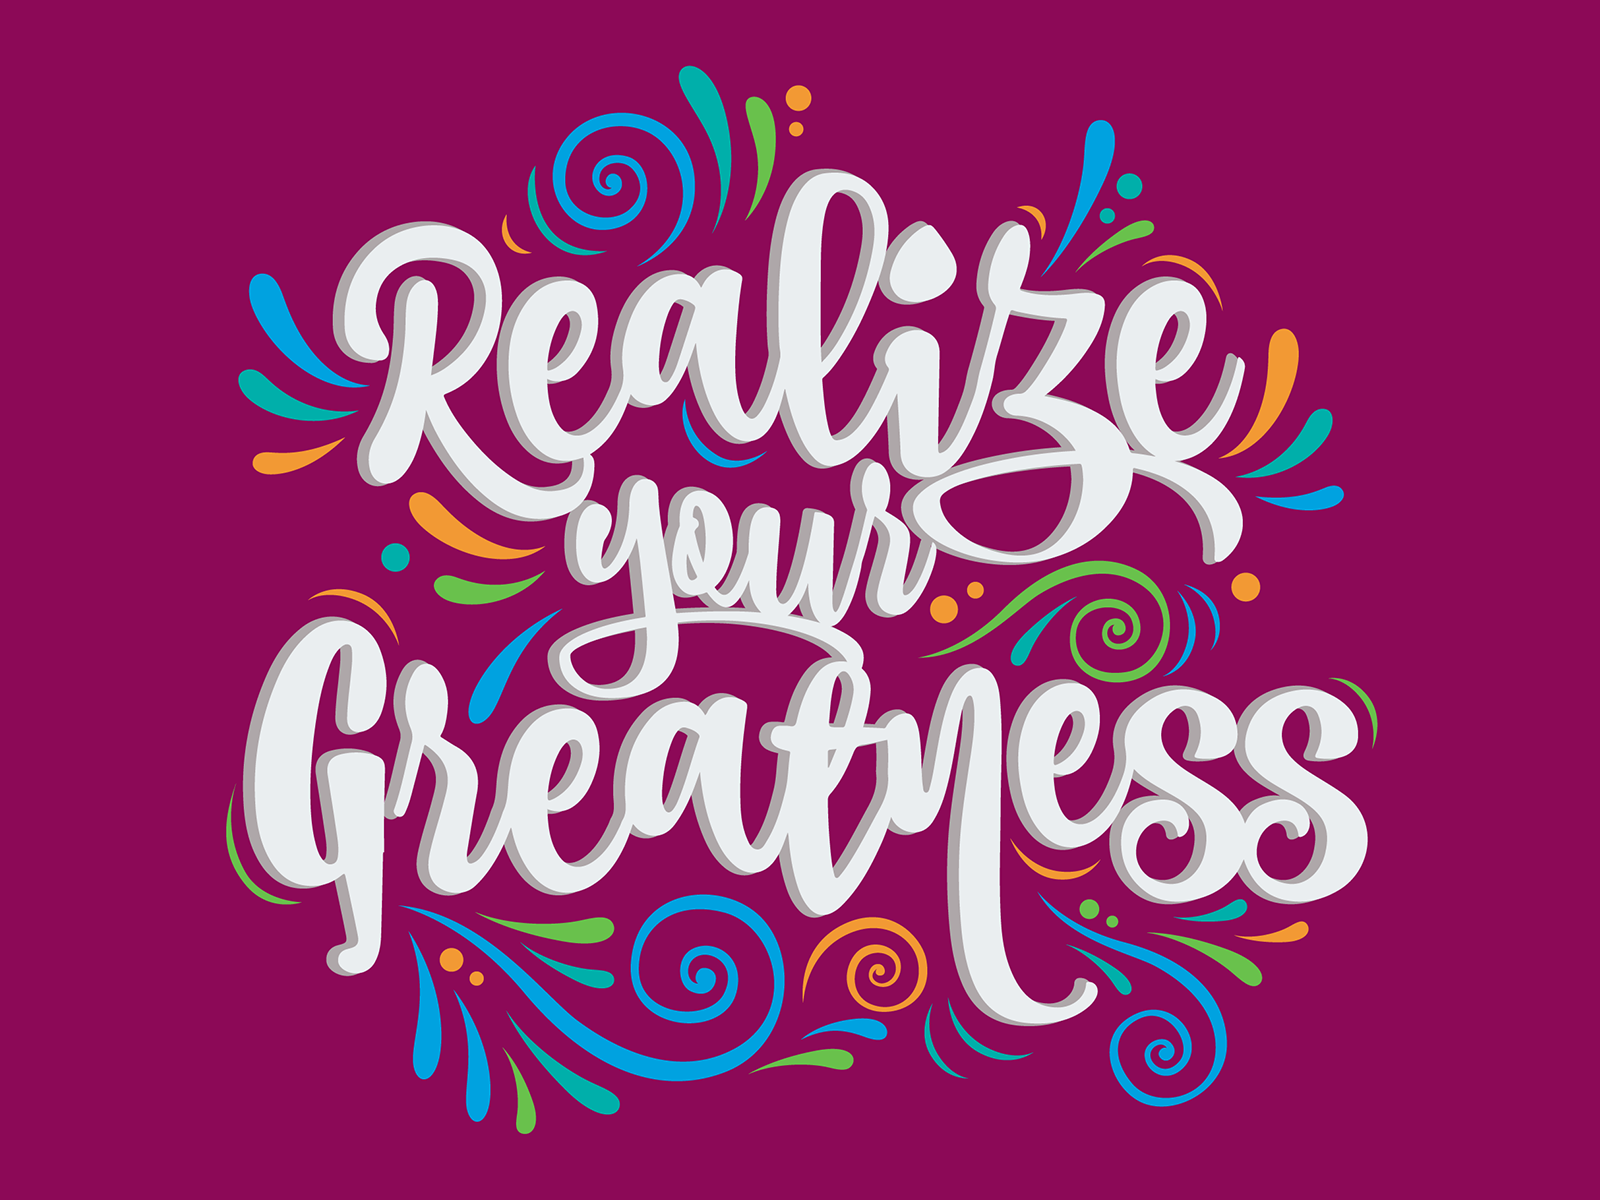 Realize Your Greatness Typography by Hanna Chang on Dribbble